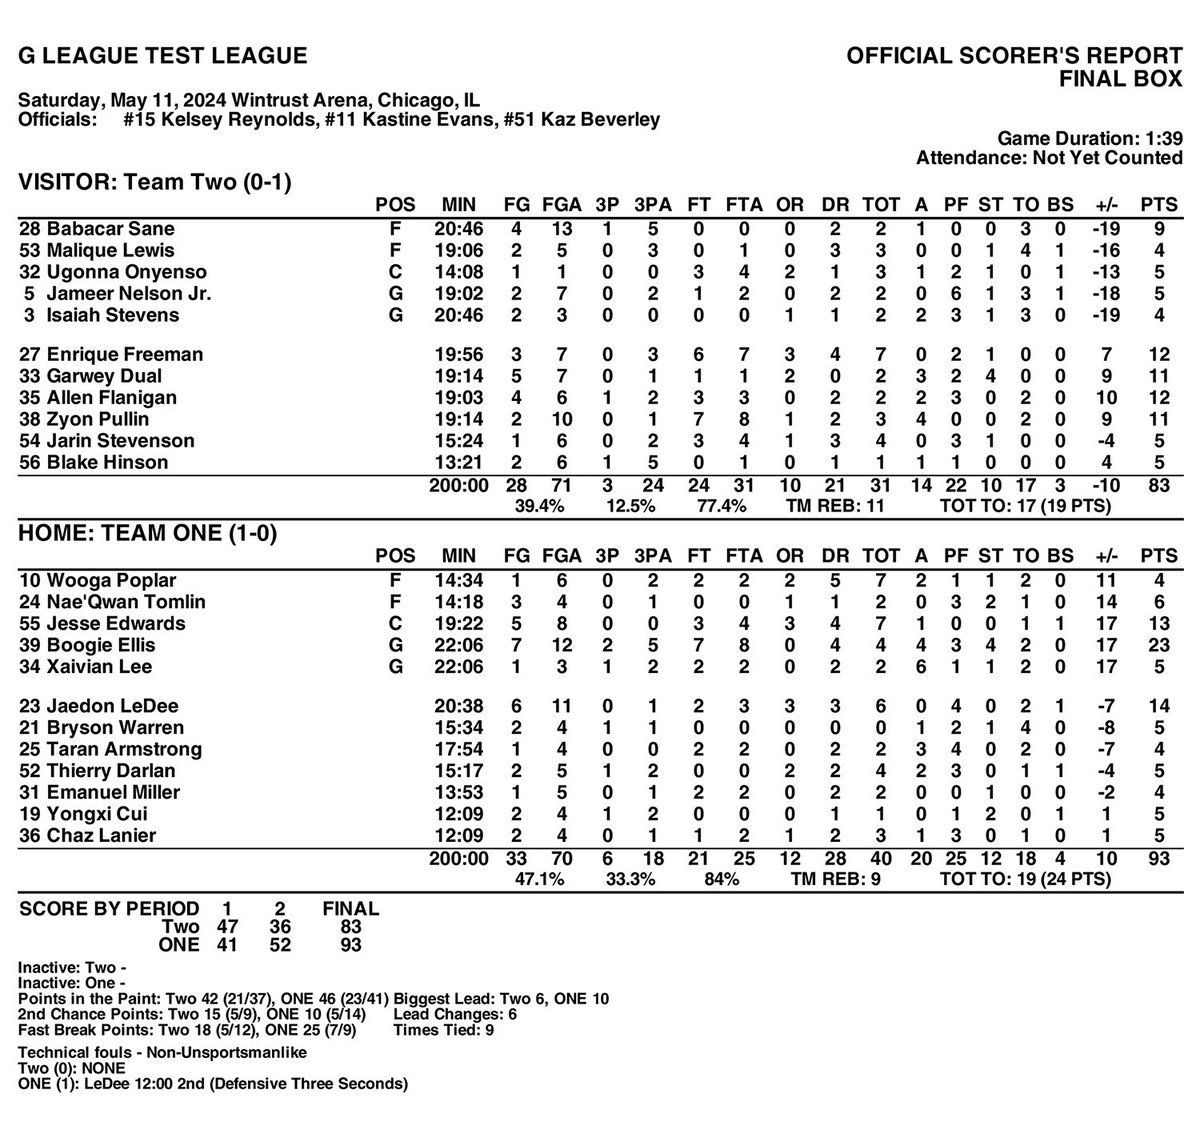 Boogie Ellis led all scorers with 23 points as Team 1 beat Team 2 in the first game of #GLeagueEliteCamp action on Day 1. Check out the full box score.